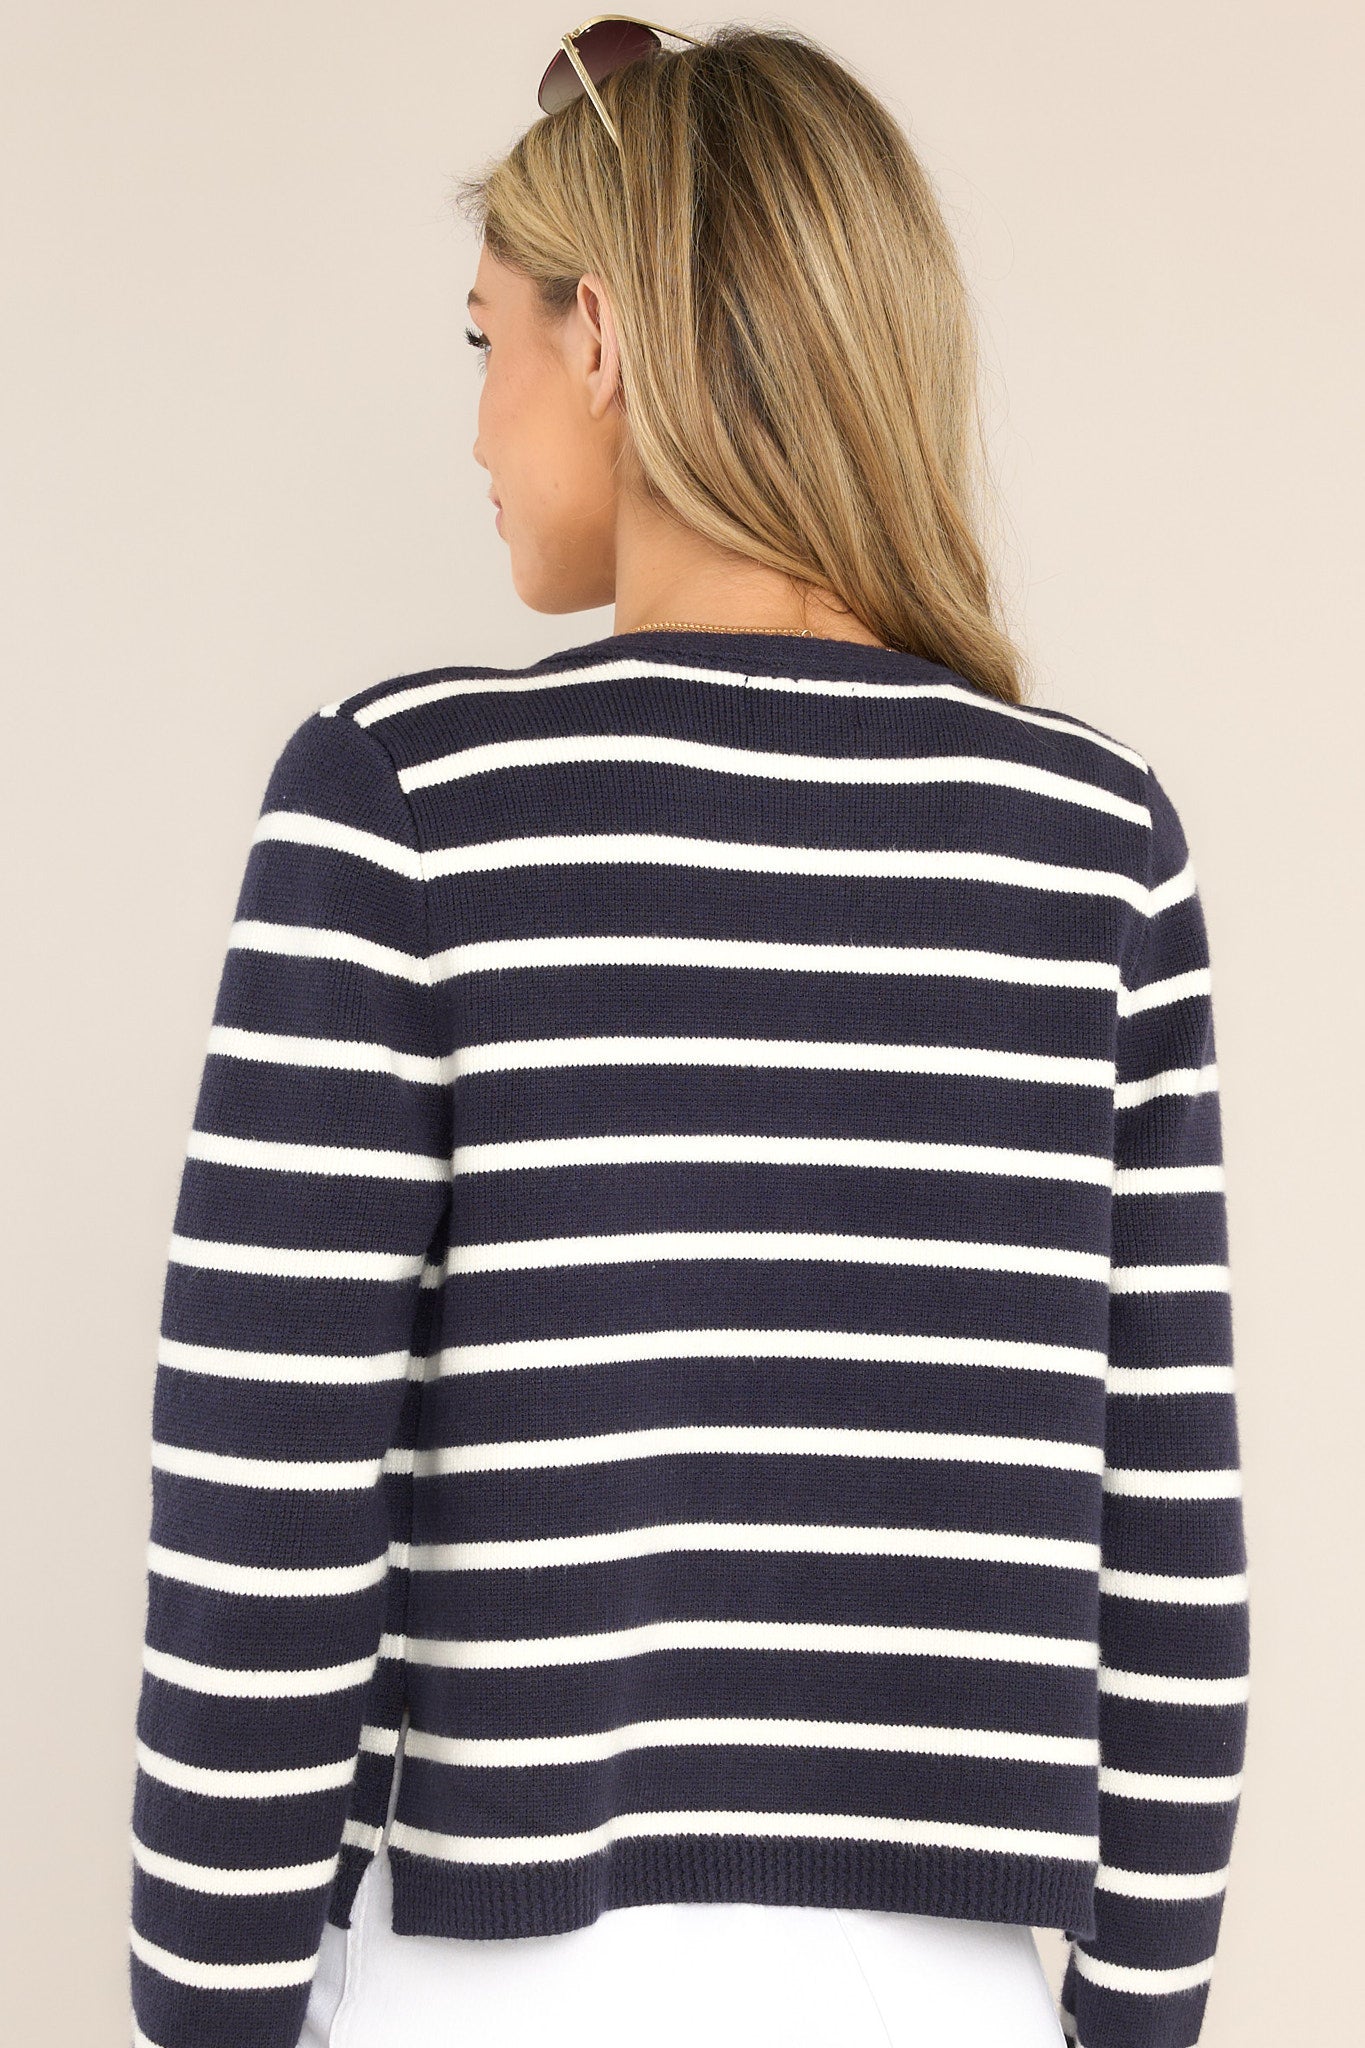 Back view of this cardigan that features a round ribbed neckline, long sleeves with ribbed cuffs, ribbed hemline, and a modern horizontal striped pattern.